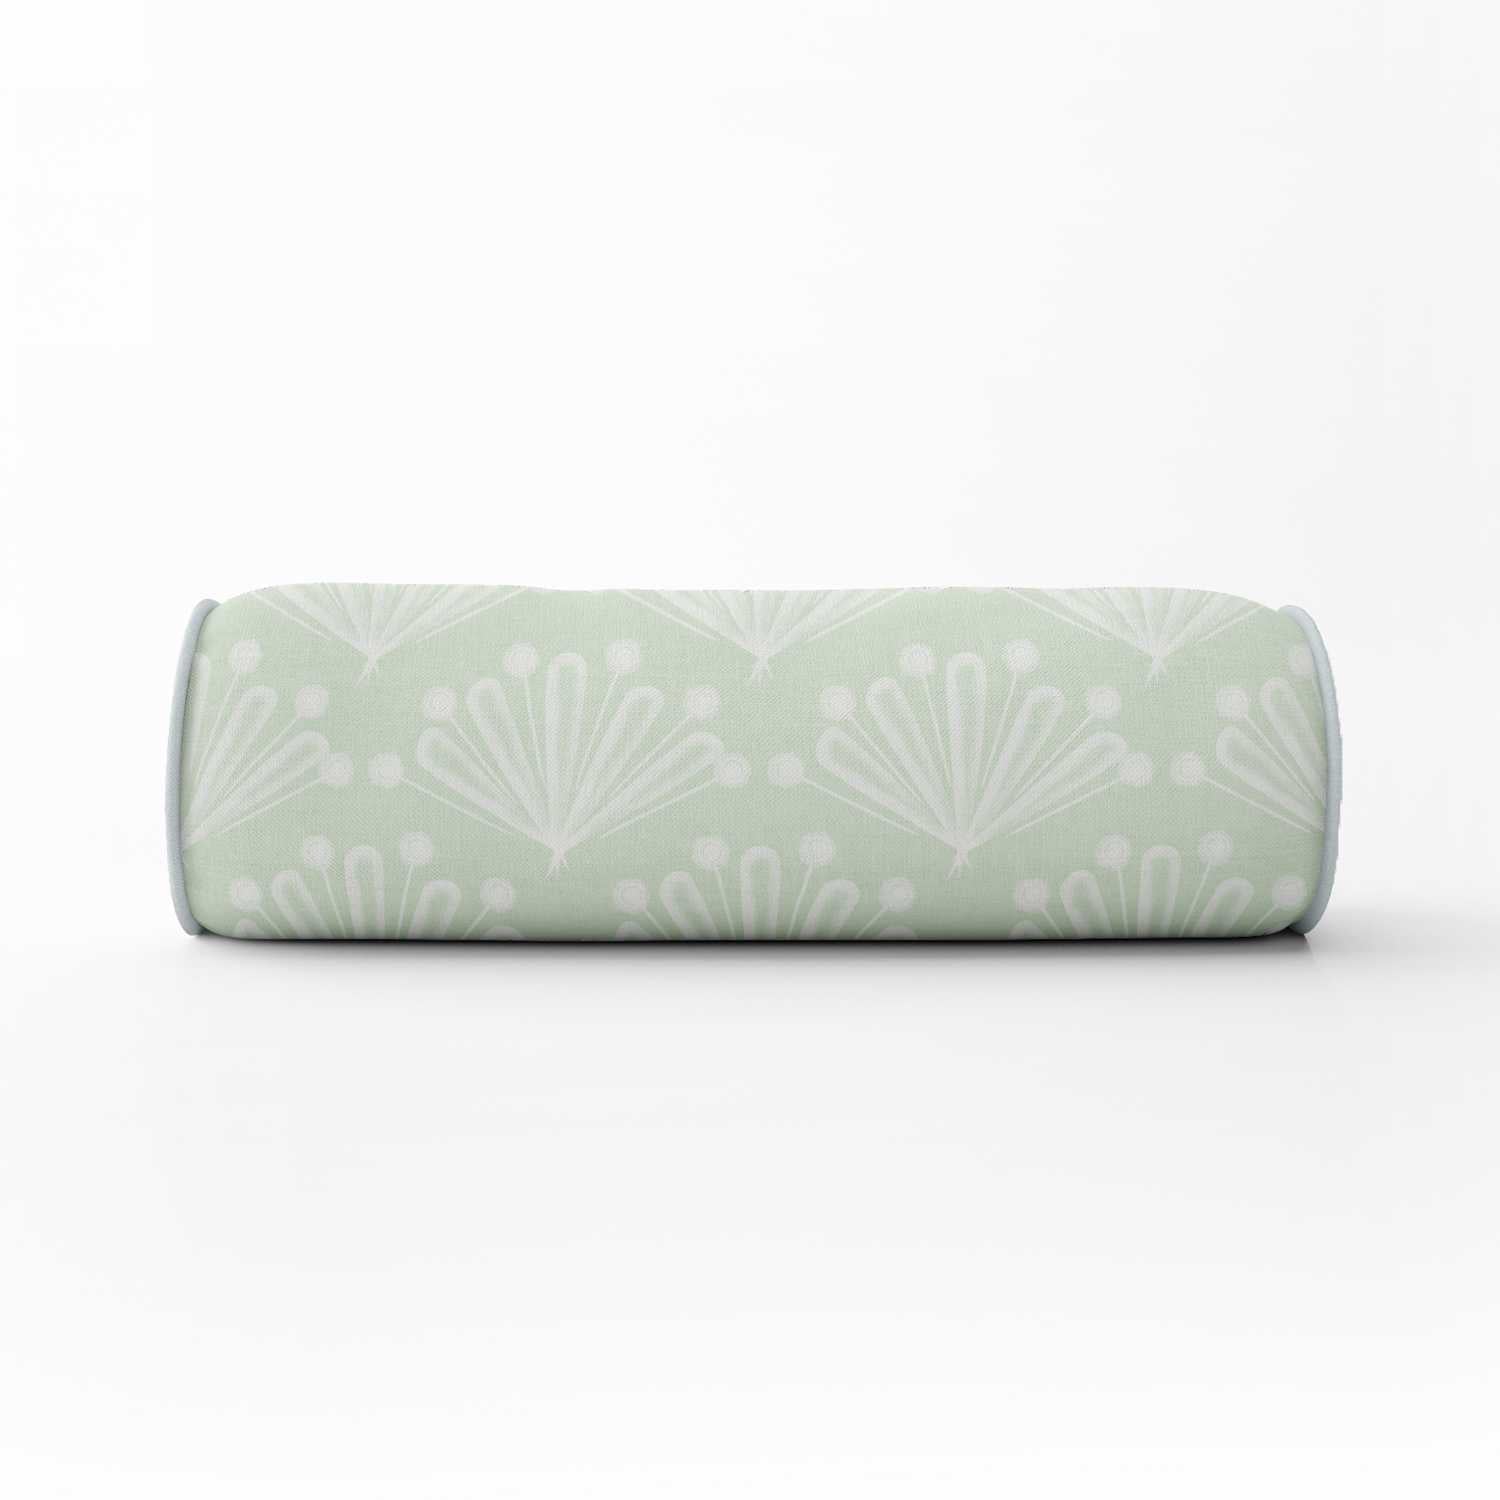 large-scale-mint-flower-bolster-blue-piping.jpg